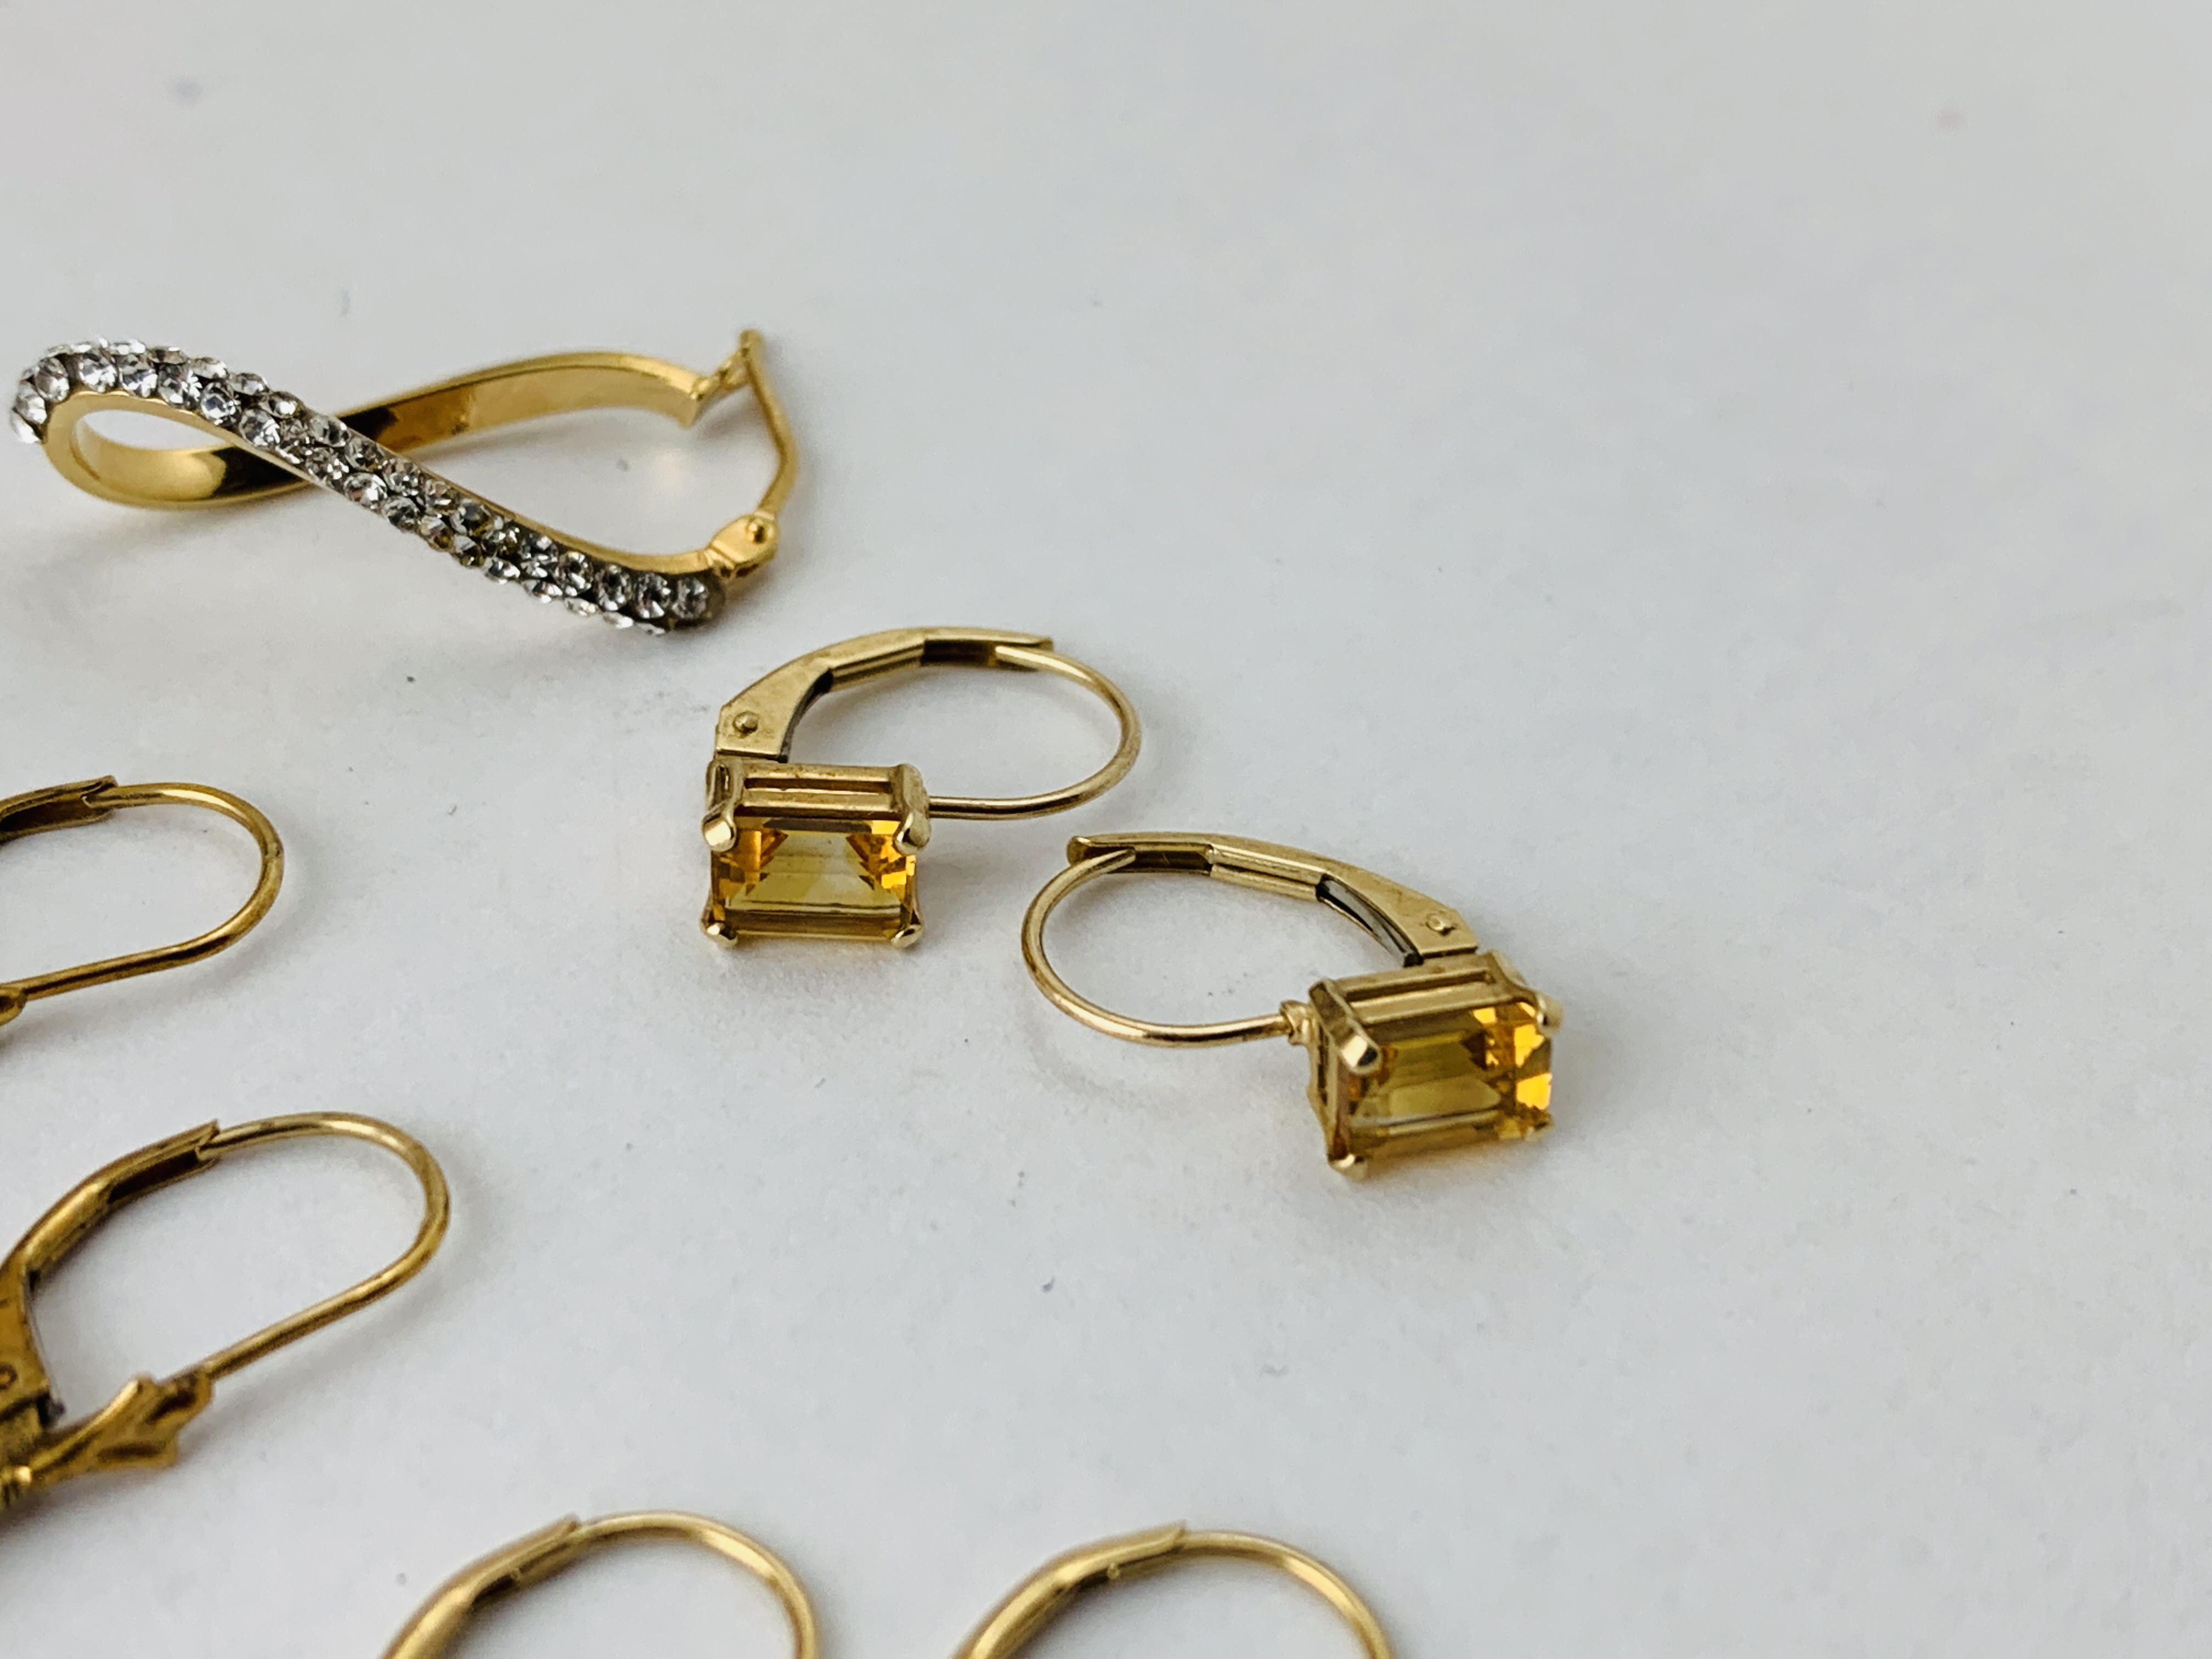 4 X PAIRS OF 9CT GOLD STONE SET DESIGNER EARRINGS - Image 5 of 7